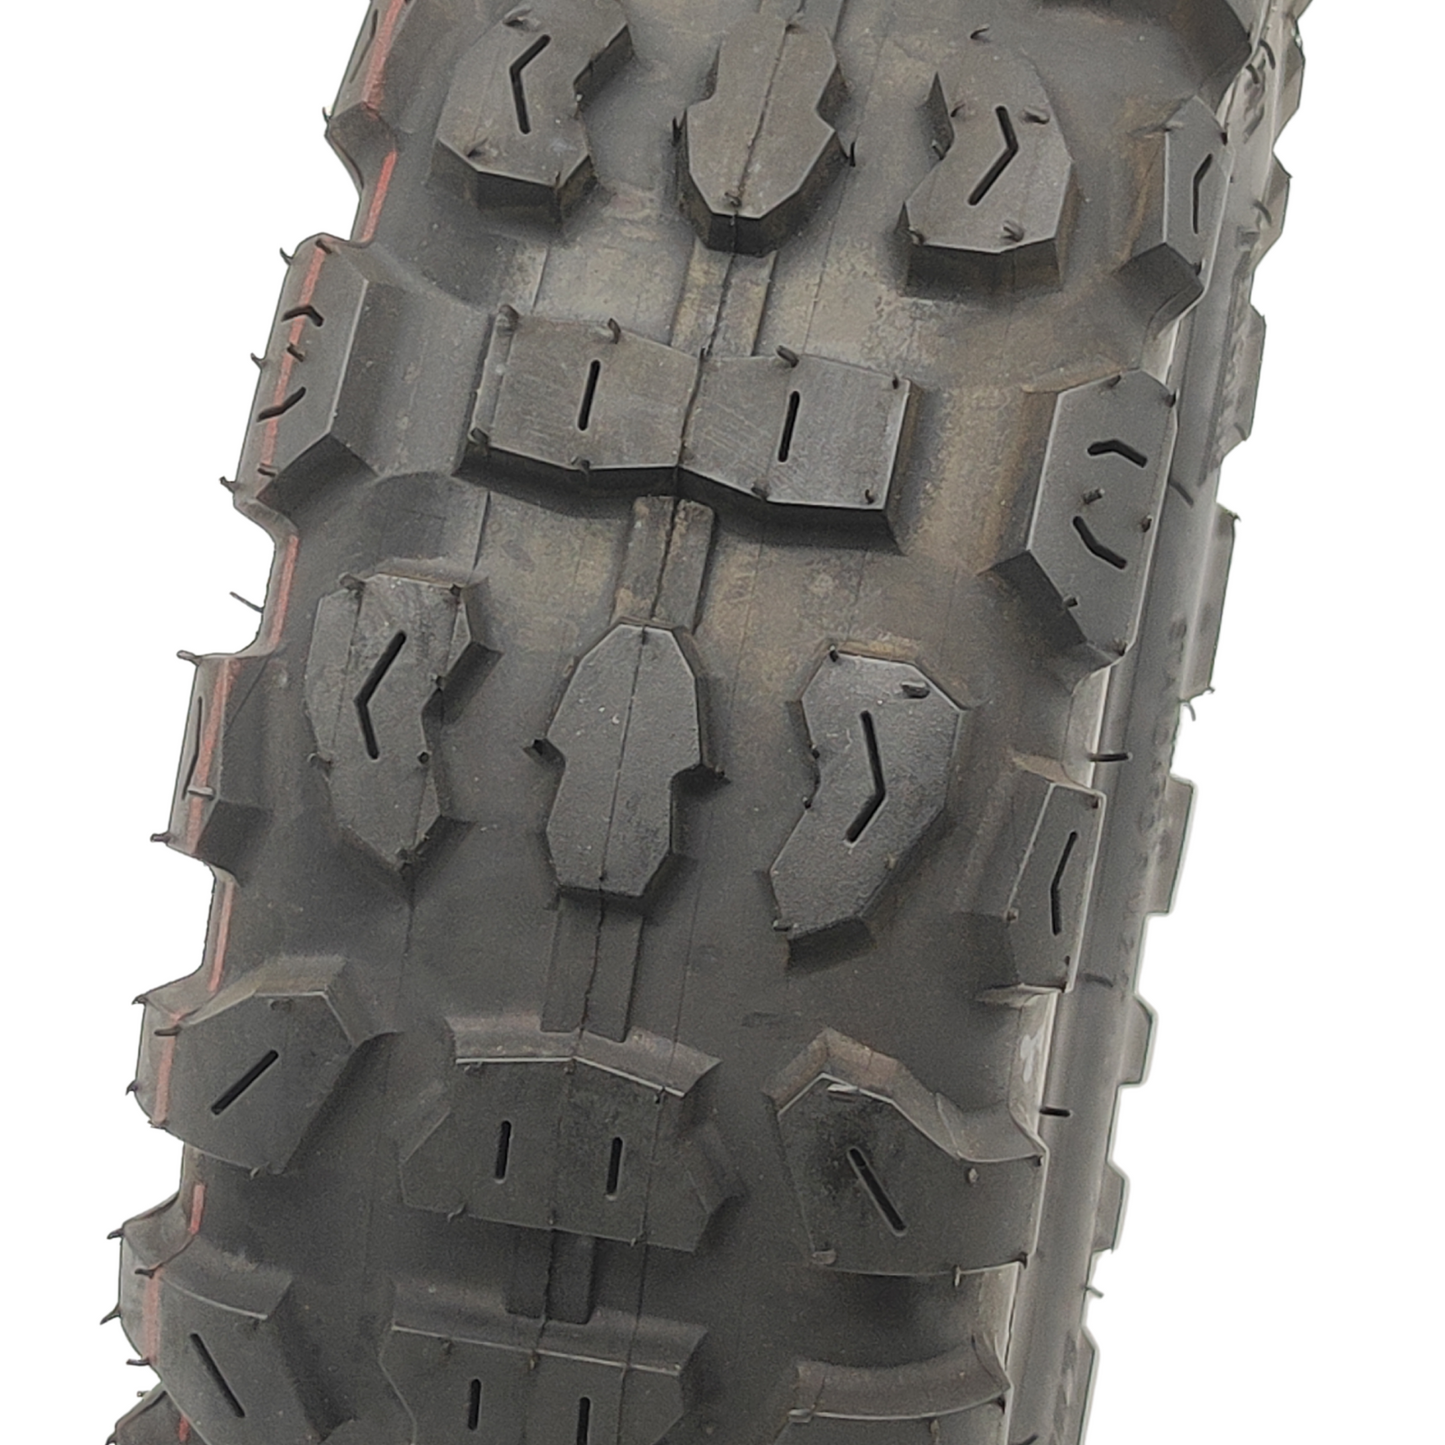 Urbanglide ALL ROAD 3 Off-Road Reifen 90/65-6.5 mit Ventil Tubeless